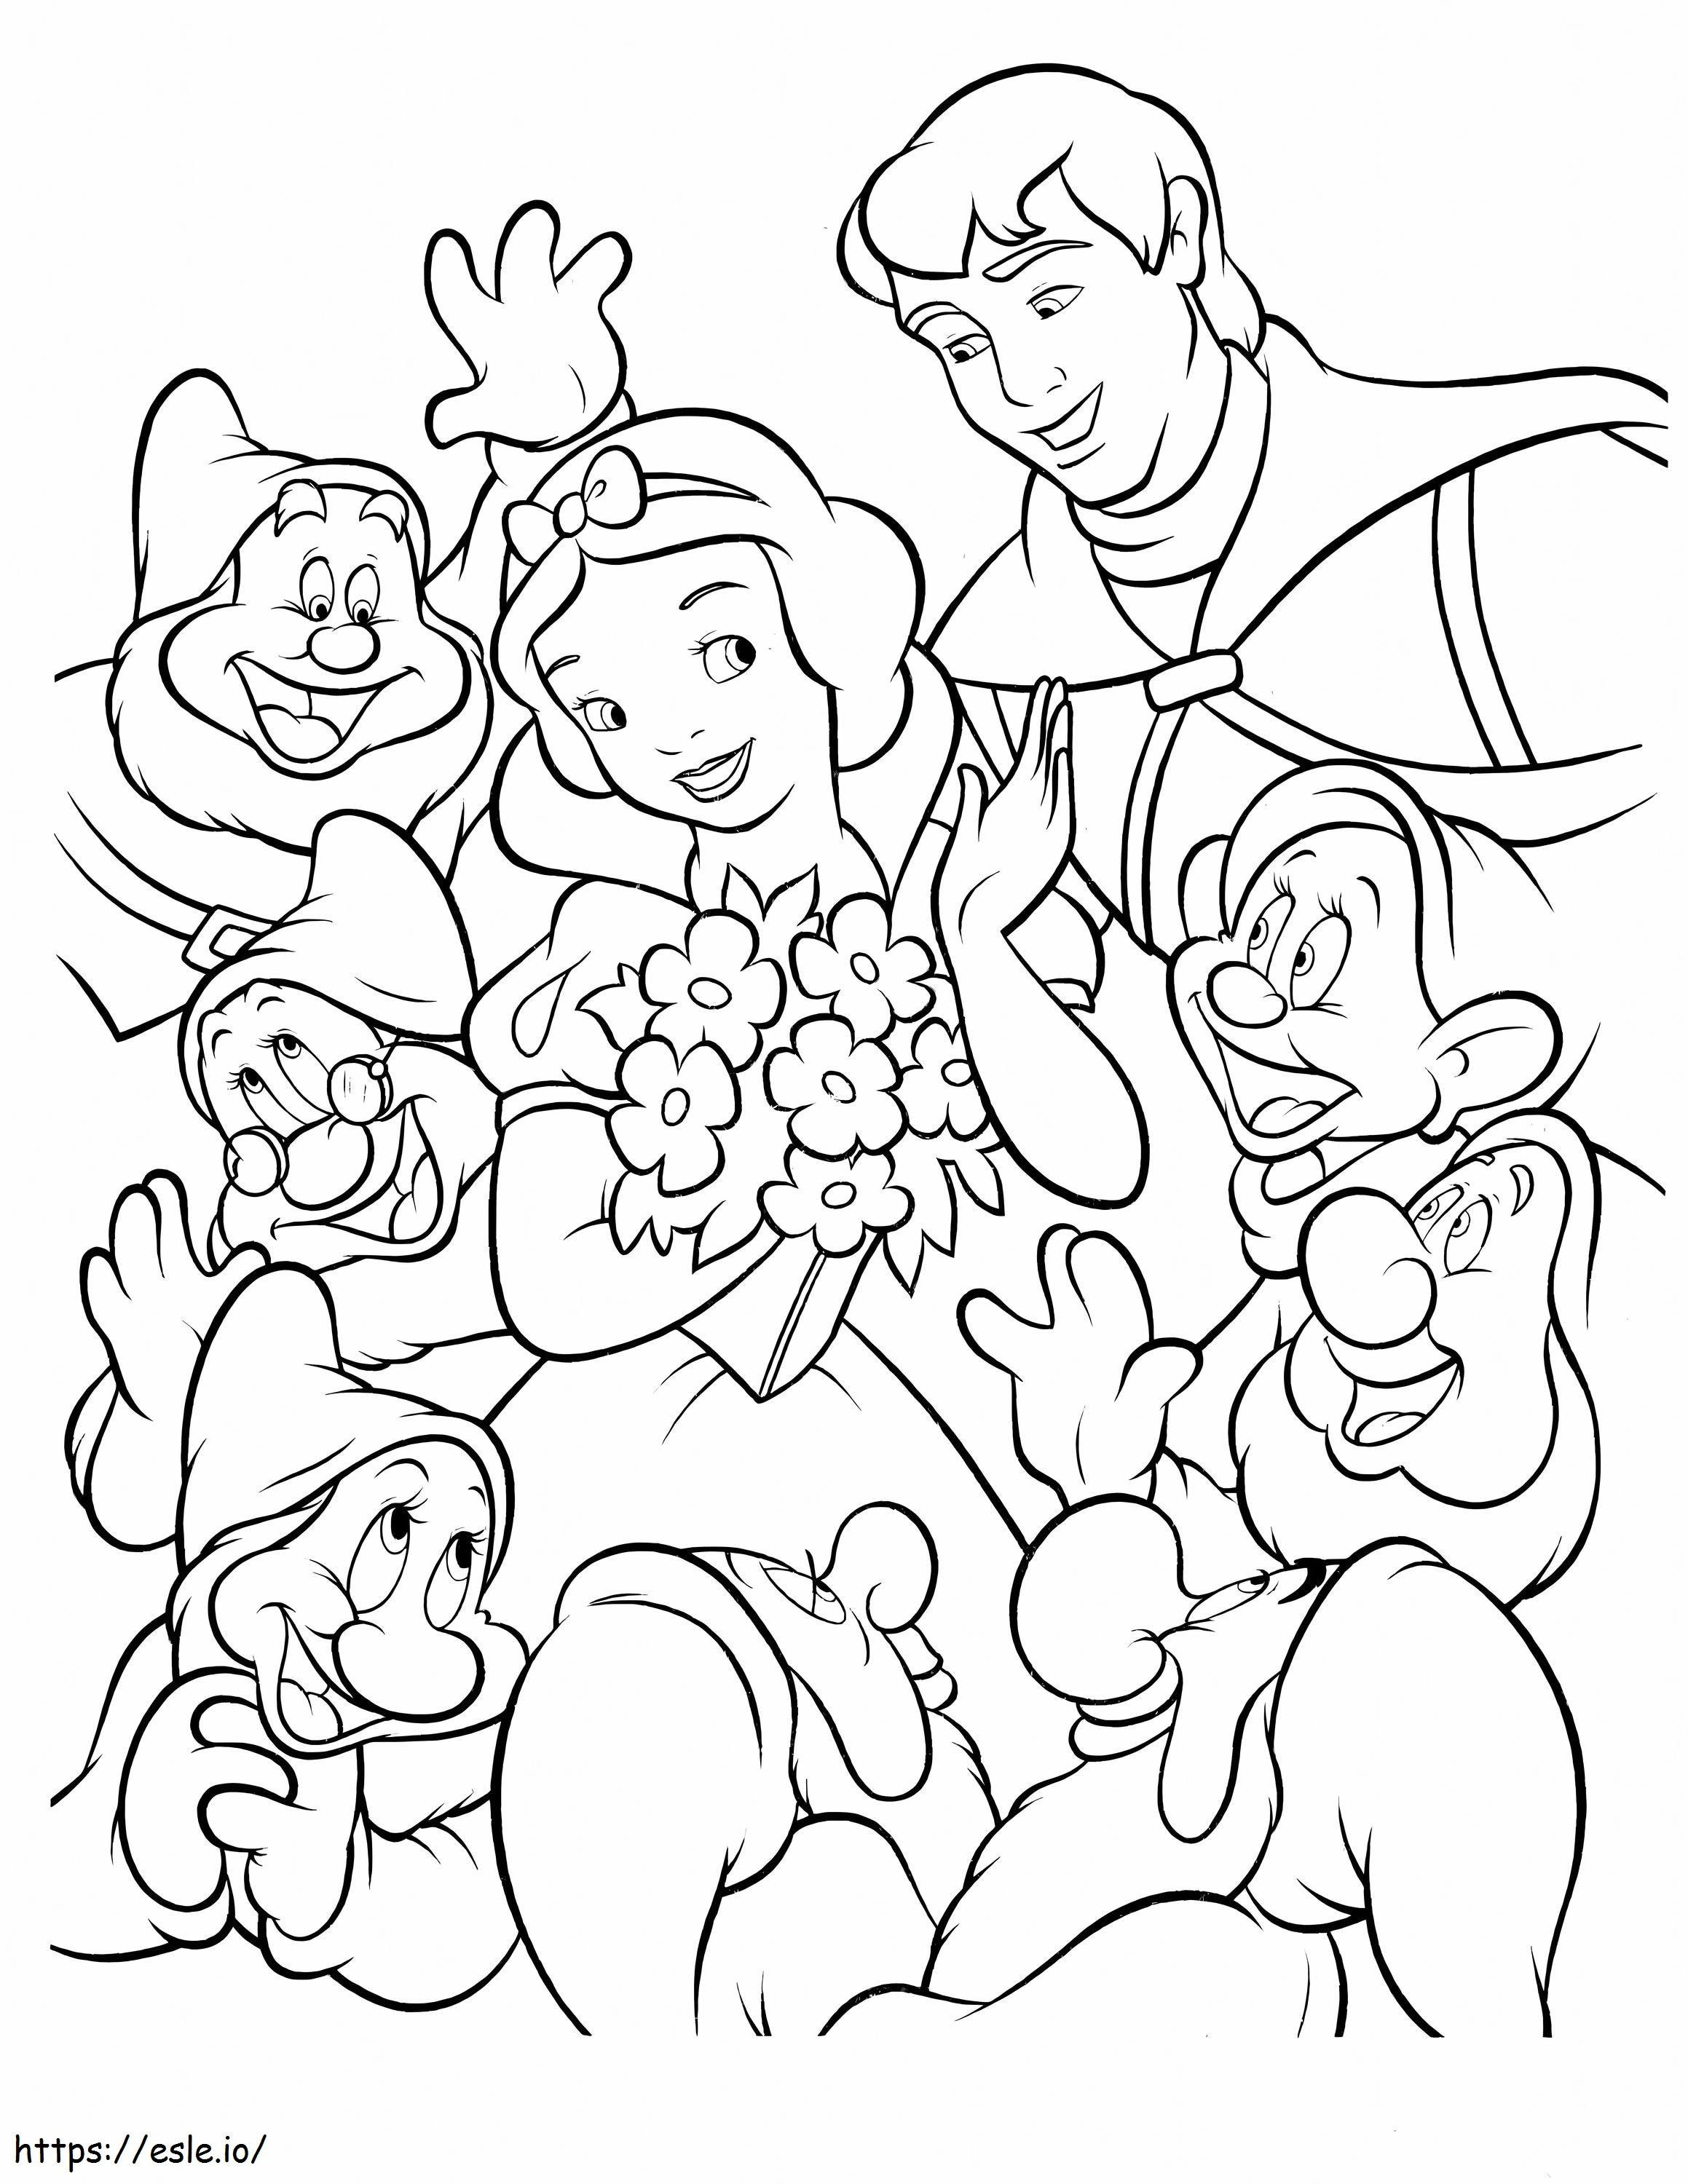 Snow White The Prince And The Seven Dwarfs coloring page